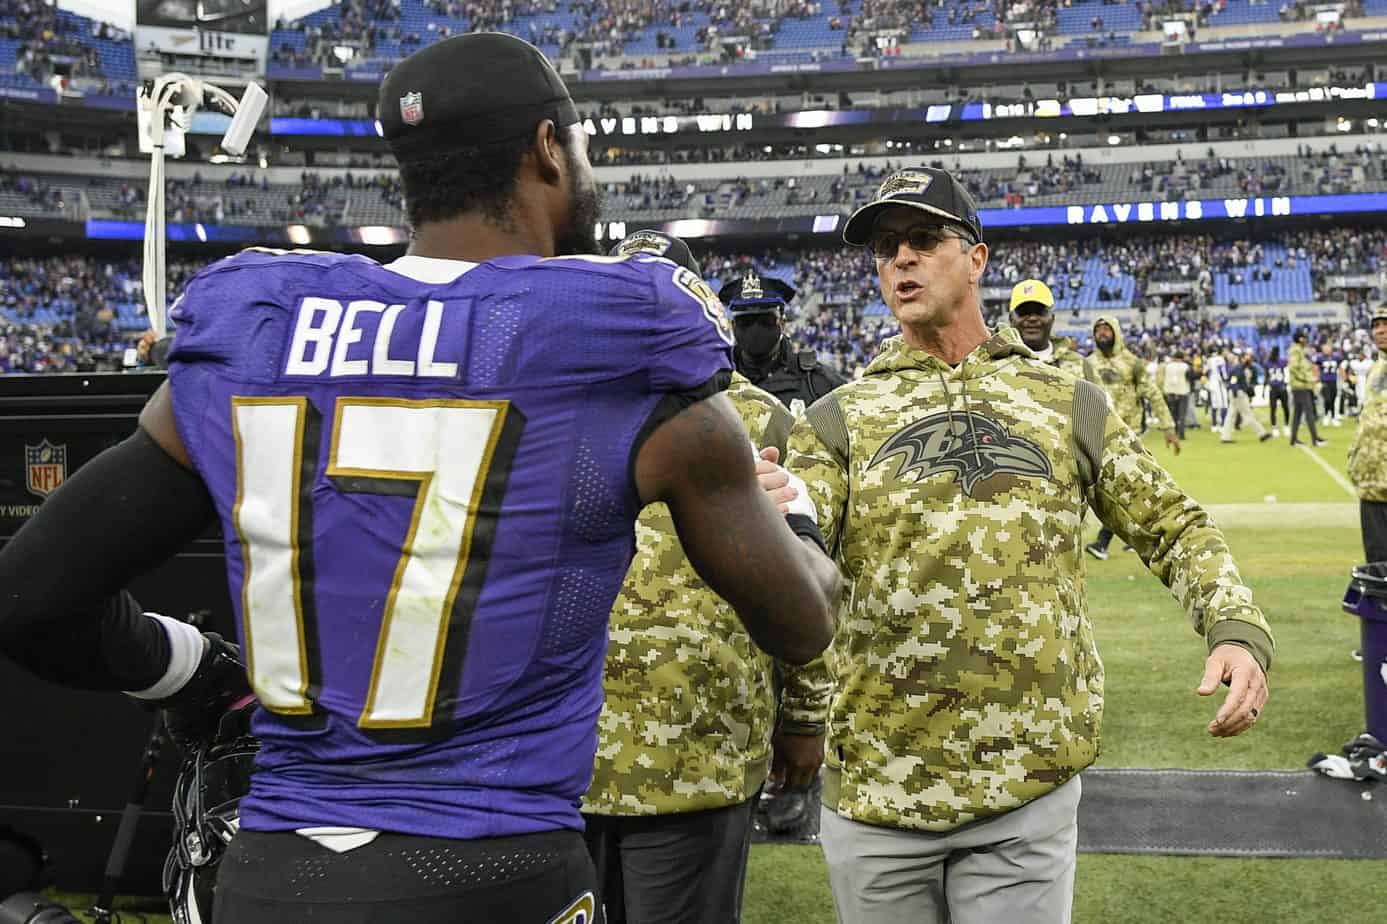 Veteran running back Le'Veon Bell took to social media to send out a statement after being waived by the Baltimore Ravens on Tuesday morning